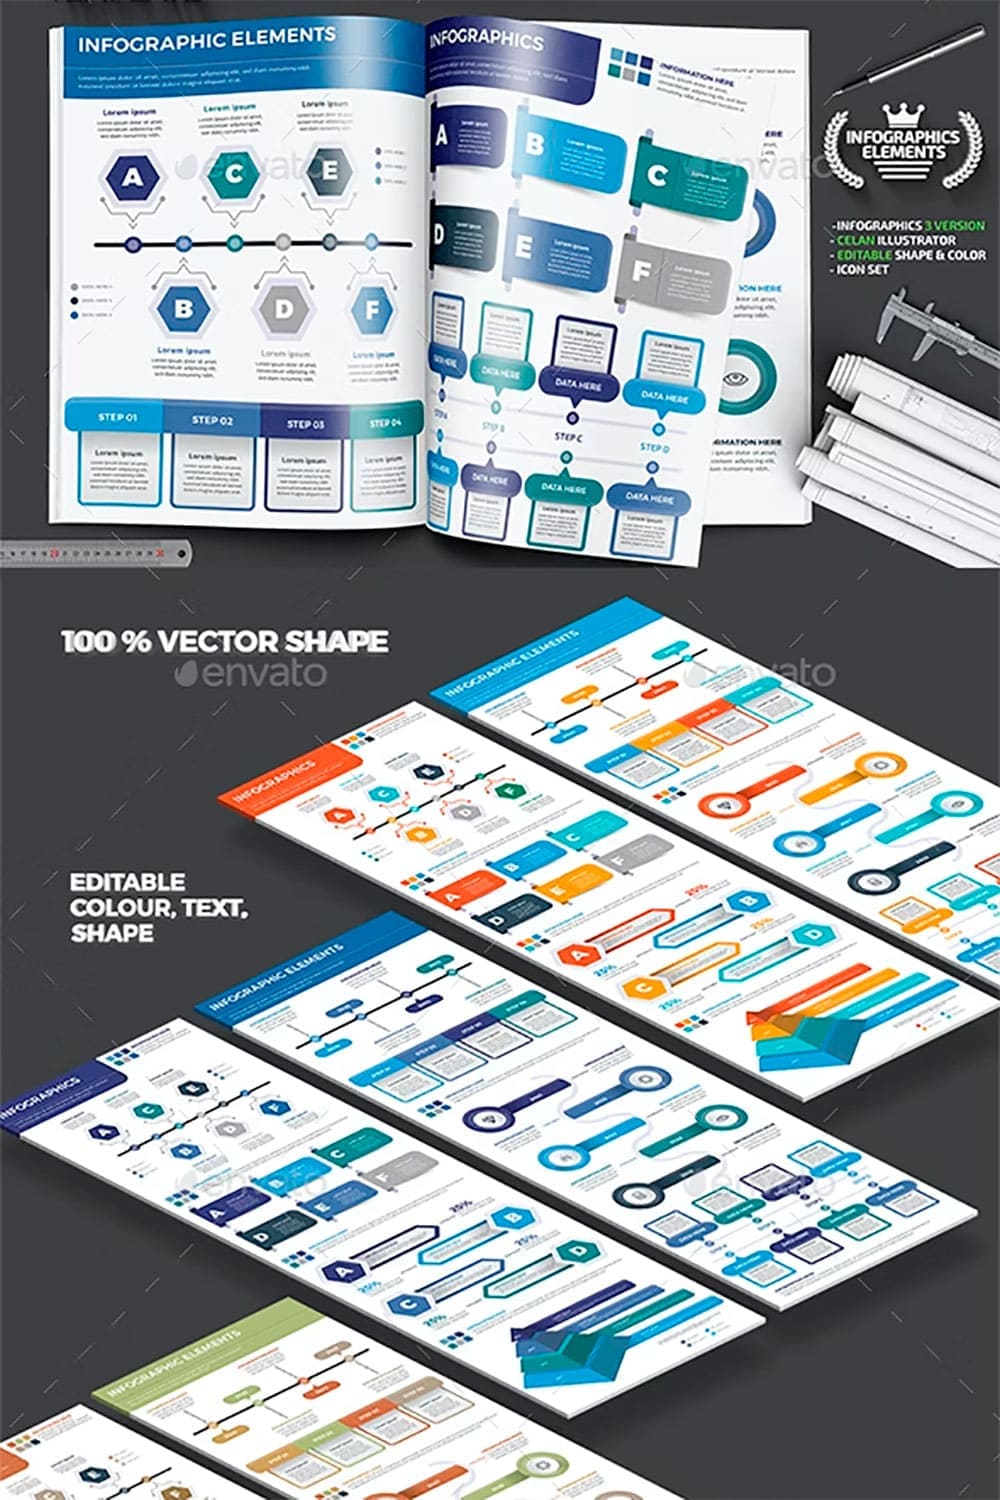 Infographic elements design, picture for pinterest.